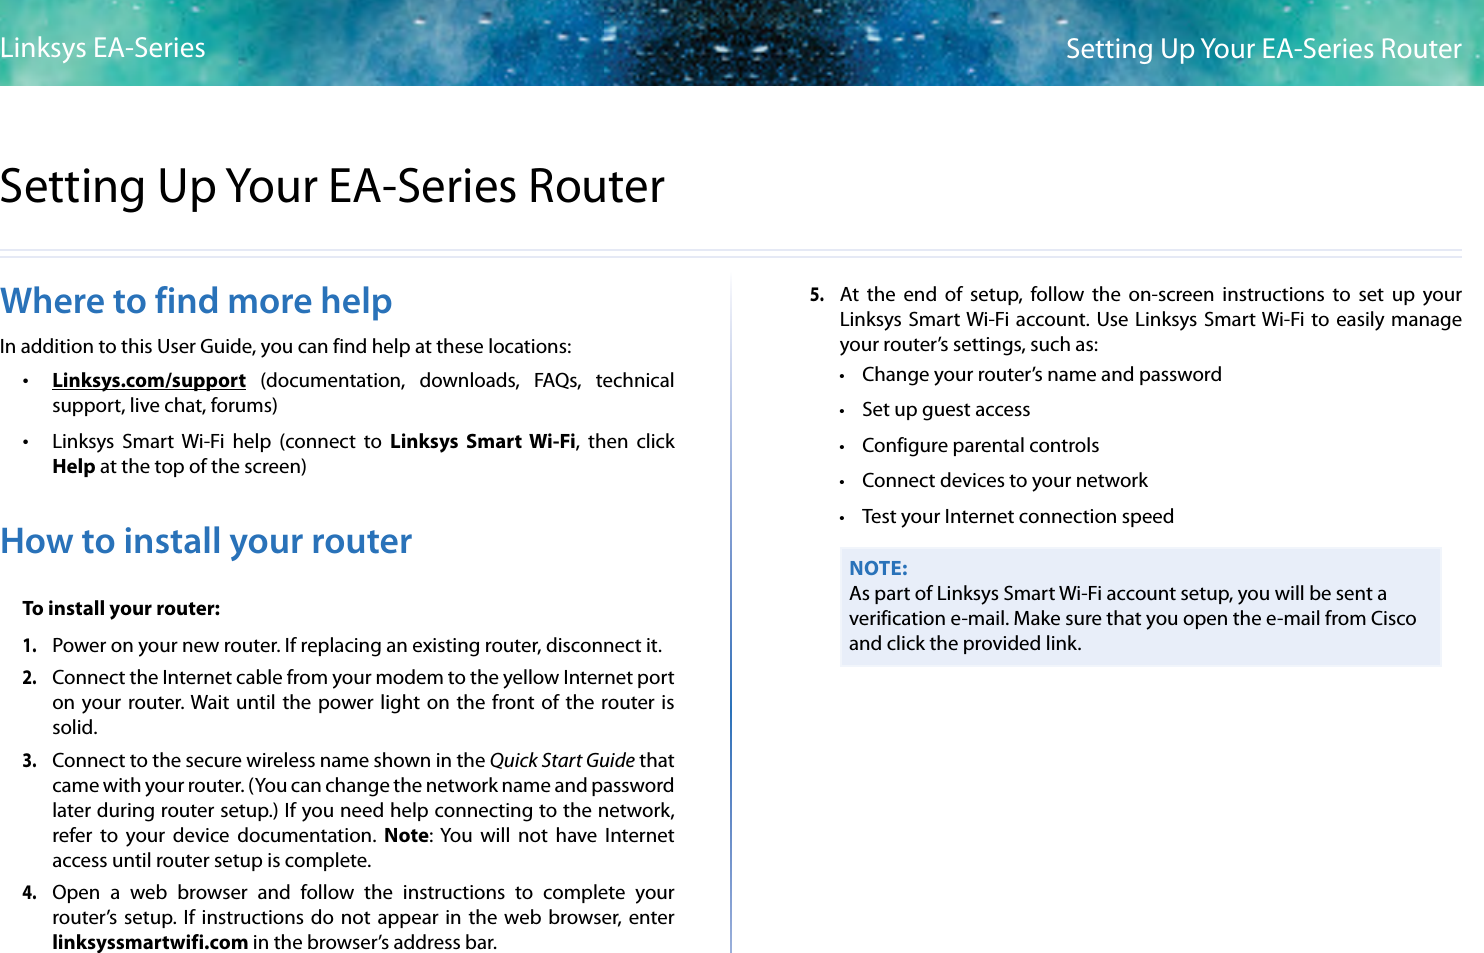 3Setting Up Your EA-Series RouterLinksys EA-Series3Where to find more helpIn addition to this User Guide, you can find help at these locations: •Linksys.com/support  (documentation,  downloads,  FAQs,  technical support, live chat, forums) •Linksys  Smart  Wi-Fi  help  (connect  to  Linksys  Smart Wi-Fi,  then  click Help at the top of the screen)How to install your routerTo install your router:1. Power on your new router. If replacing an existing router, disconnect it.2. Connect the Internet cable from your modem to the yellow Internet port on your  router. Wait  until the power light  on the front of the  router is solid.3. Connect to the secure wireless name shown in the Quick Start Guide that came with your router. (You can change the network name and password later during router setup.) If you need help connecting to the network, refer  to  your  device  documentation. Note: You  will  not  have  Internet access until router setup is complete.4. Open  a  web  browser  and  follow  the  instructions  to  complete  your router’s  setup. If  instructions  do  not appear  in  the web browser, enter linksyssmartwifi.com in the browser’s address bar.5. At  the  end  of  setup,  follow  the  on-screen  instructions  to  set  up  your Linksys Smart Wi-Fi account. Use Linksys Smart Wi-Fi to easily manage your router’s settings, such as: • Change your router’s name and password • Set up guest access • Configure parental controls • Connect devices to your network • Test your Internet connection speedNOTE:As part of Linksys Smart Wi-Fi account setup, you will be sent a verification e-mail. Make sure that you open the e-mail from Cisco and click the provided link.Setting Up Your EA-Series Router